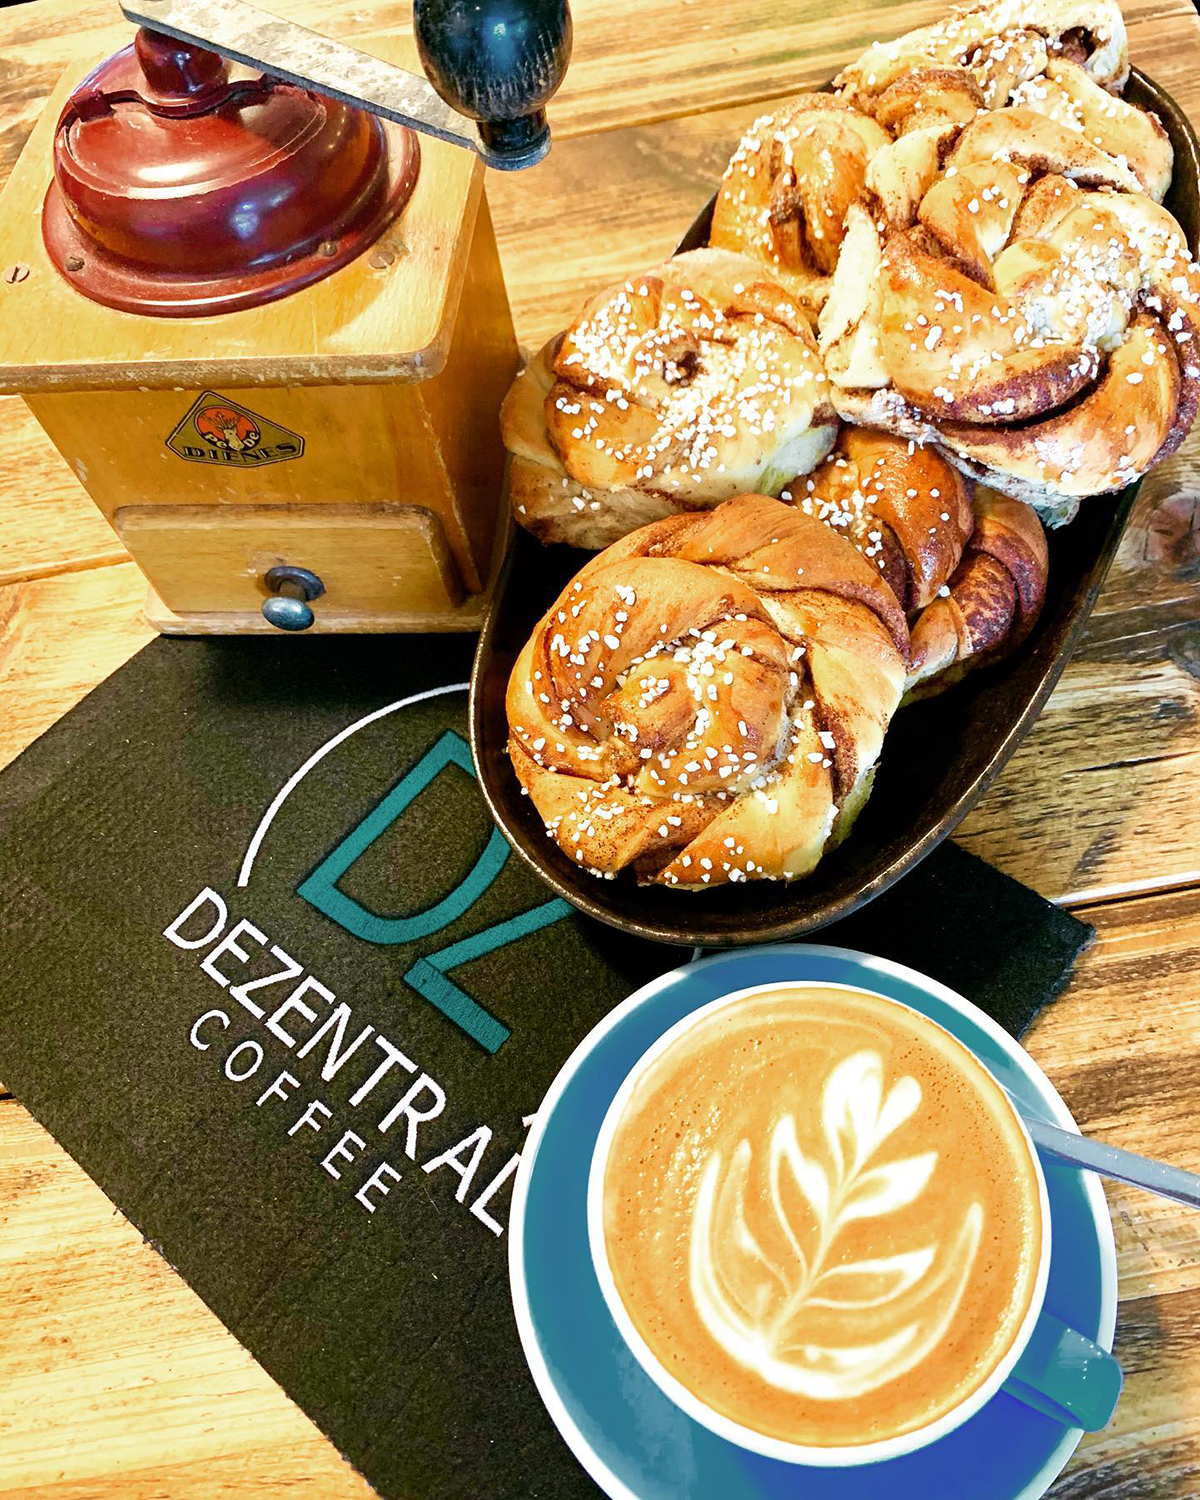 Dezentral coffee and freshly baked cinnamon buns